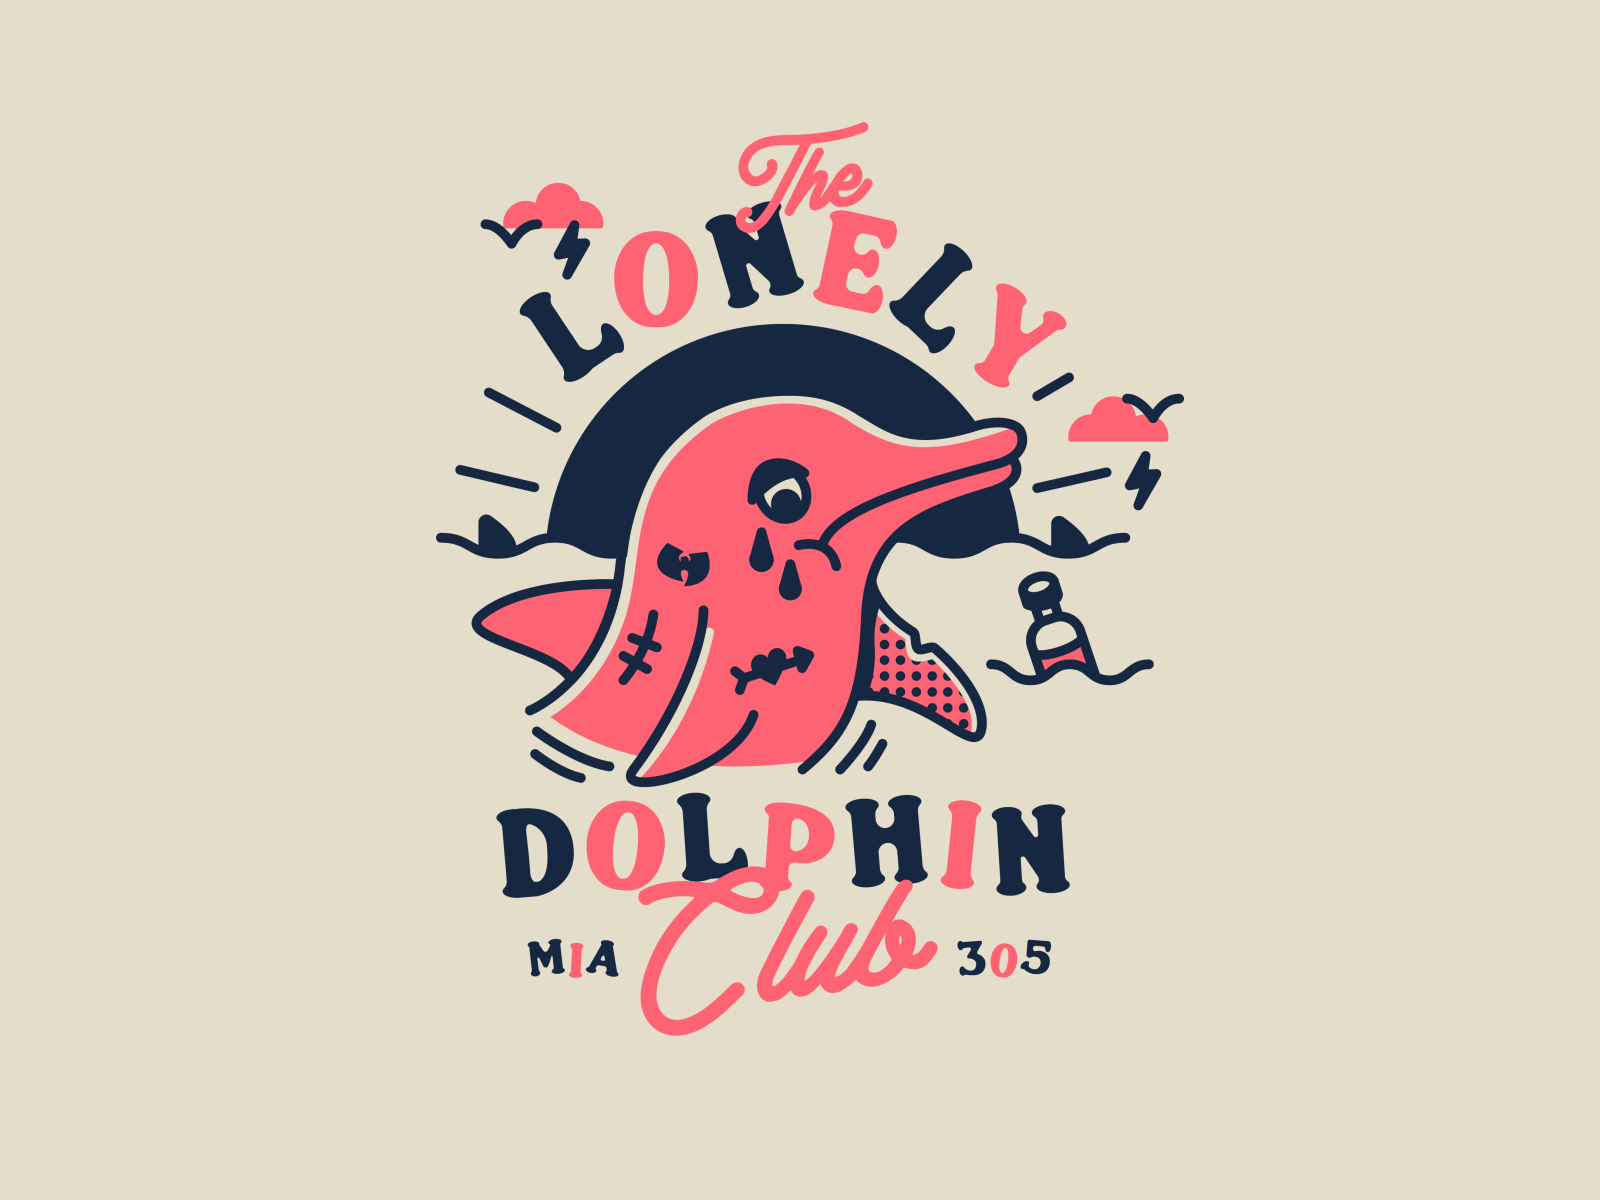 The Lonely Dolphin Club by Noah Levy on Dribbble